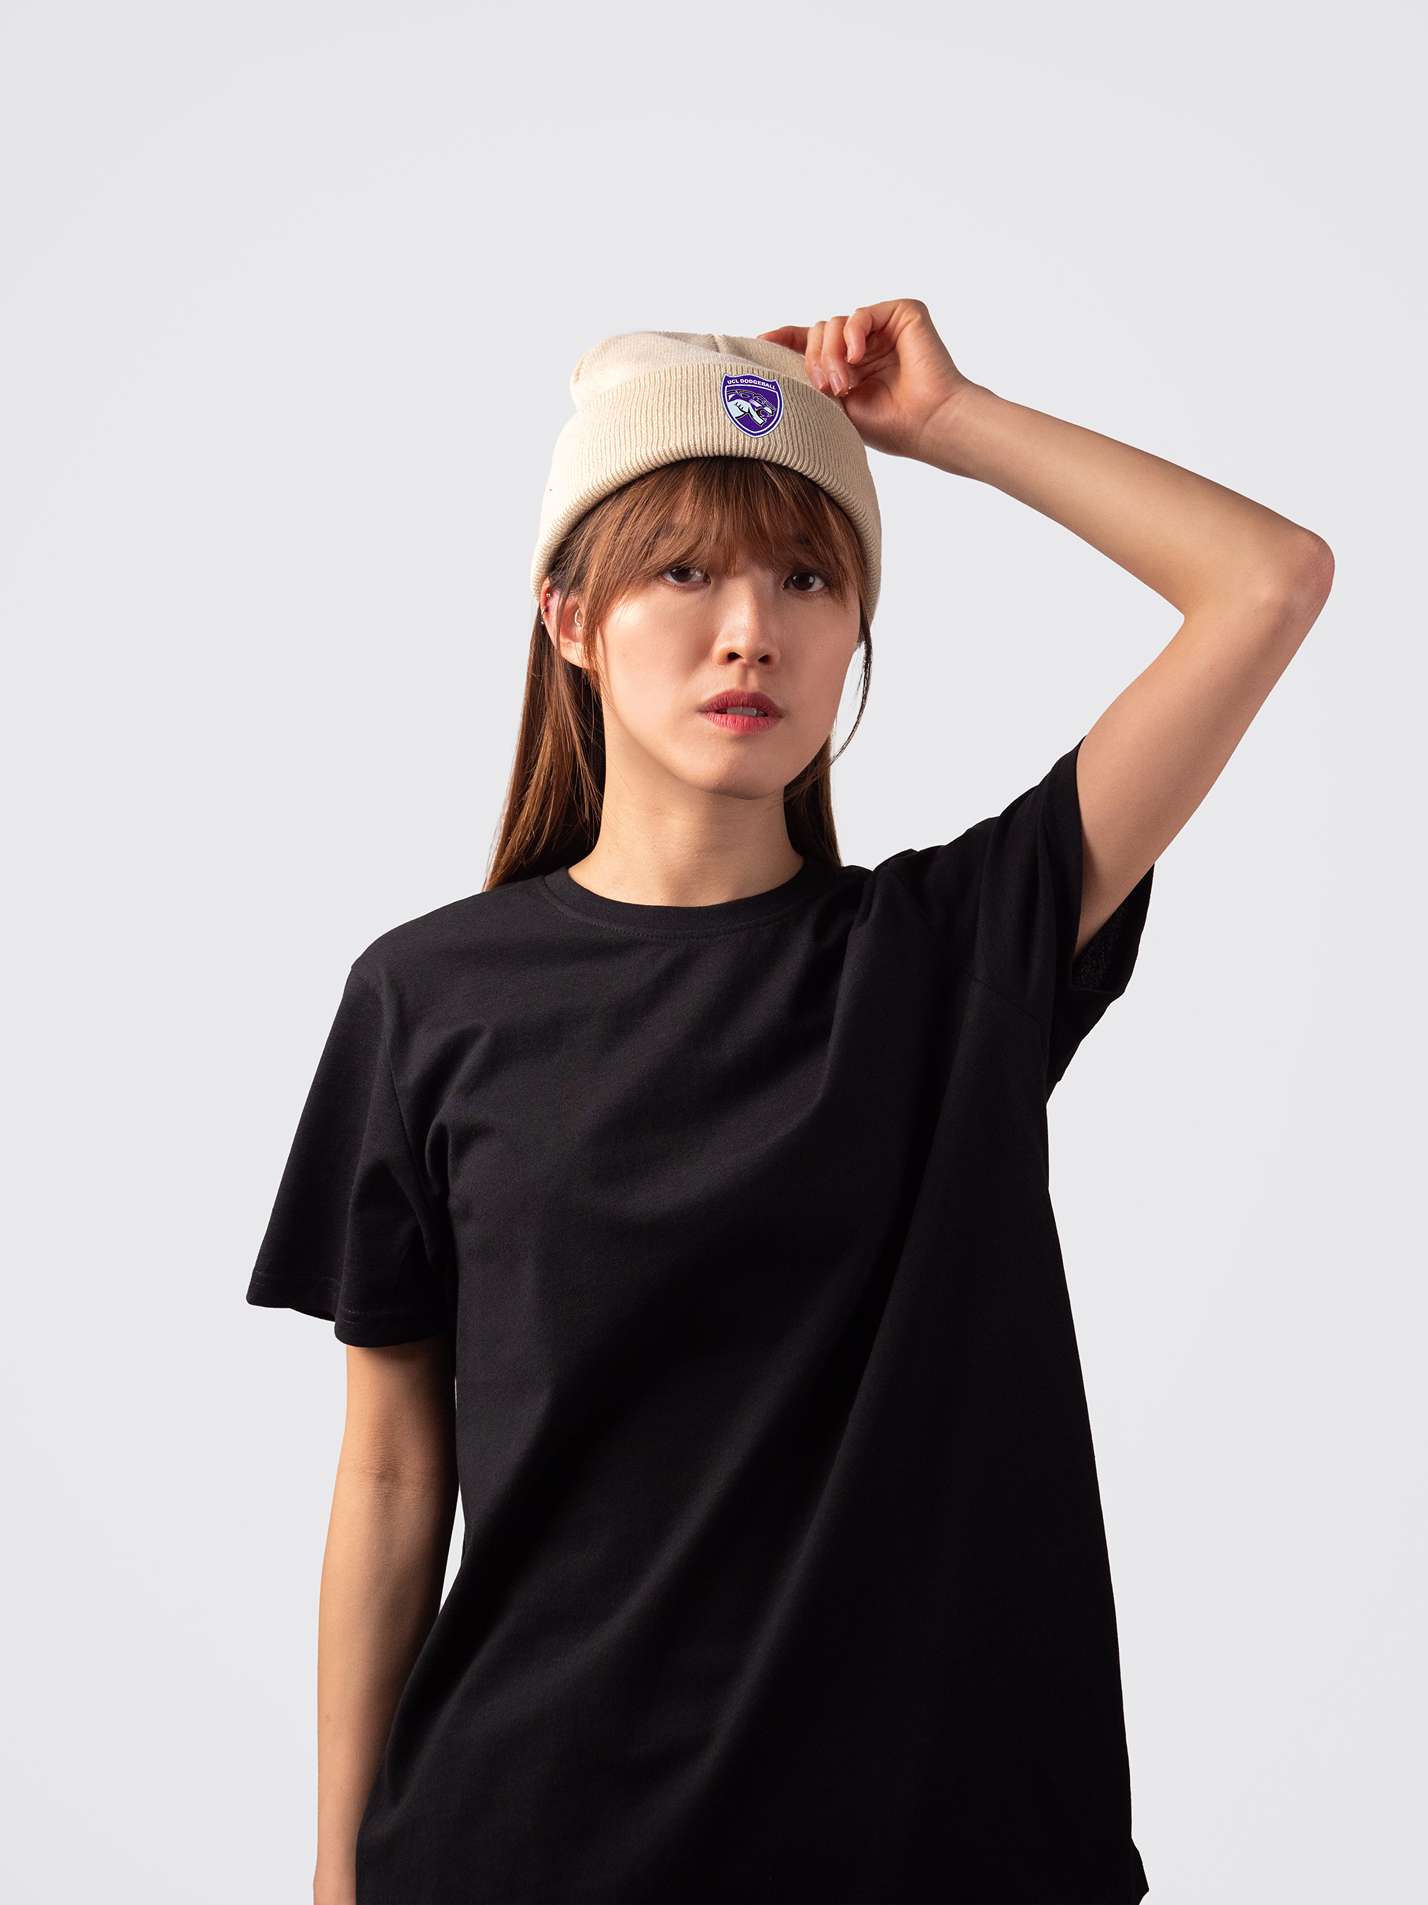 UCL Dodgeball Sustainable Cuffed Beanie